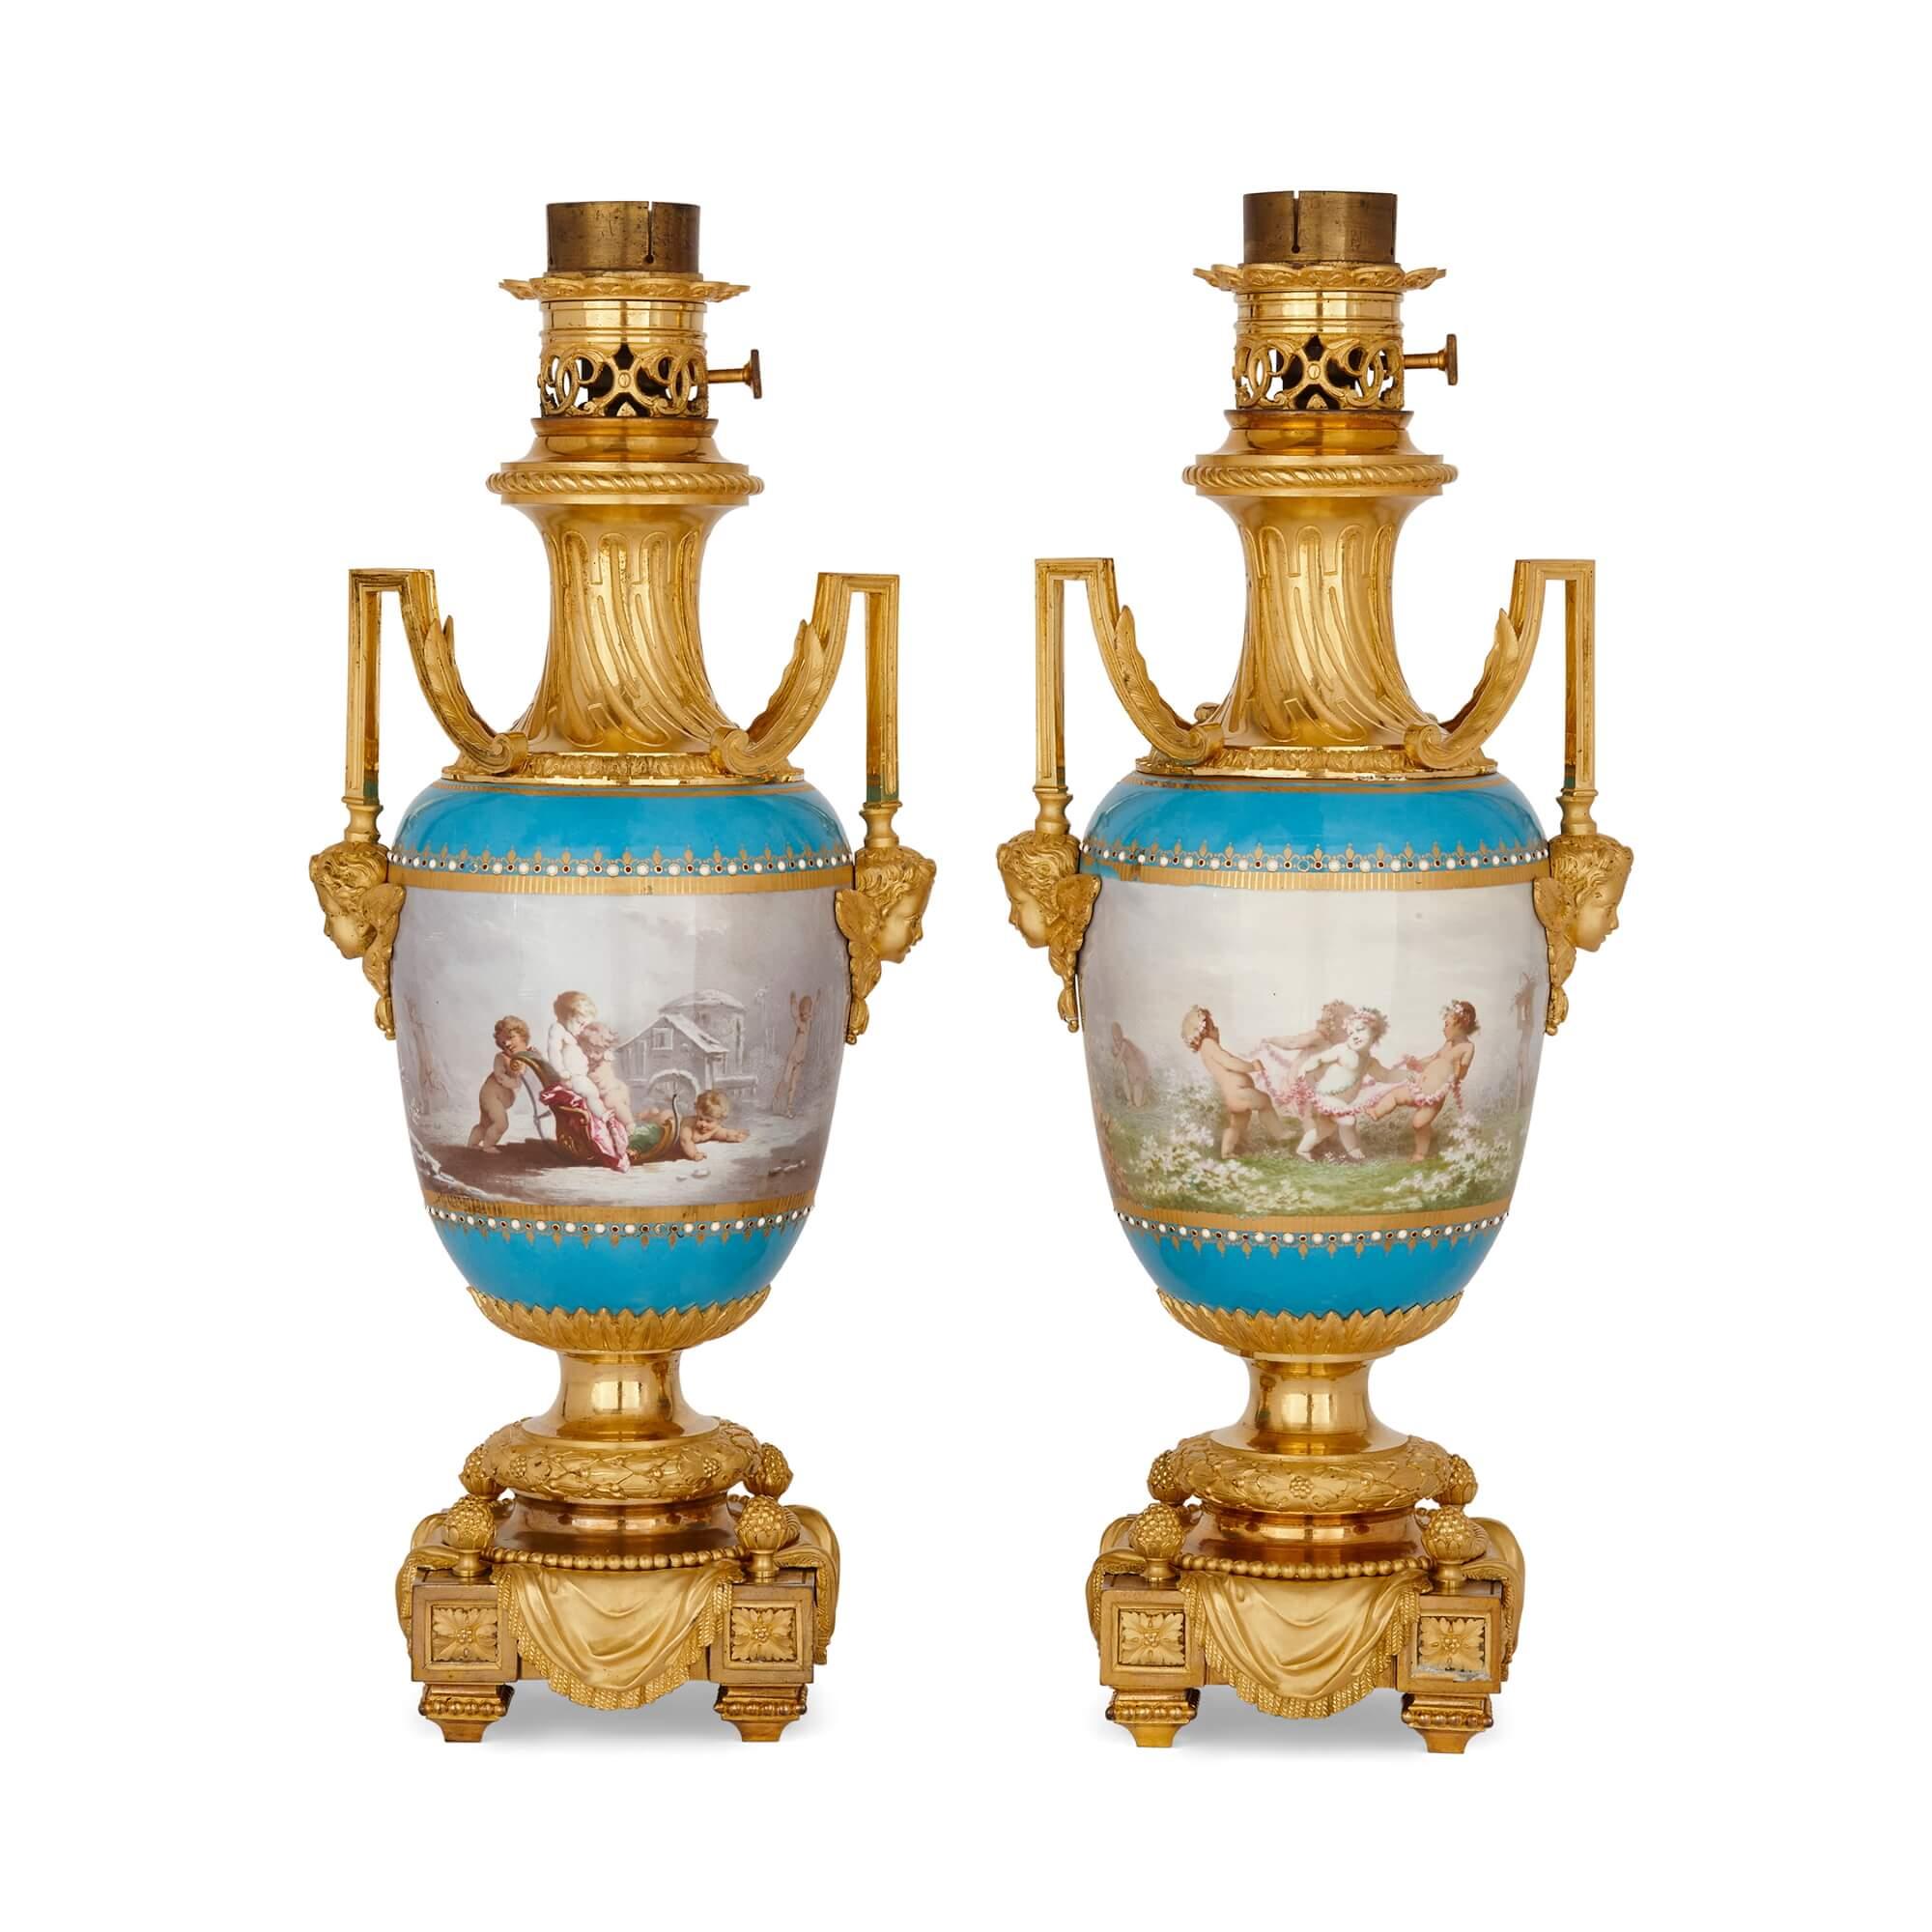 Pair of gilt-bronze mounted Sèvres porcelain lamp bases by Picard
French, Late 19th Century
Height 52cm, width 21cm, depth 16cm

These superb pieces are a pair of Sèvres style porcelain lamps bases, mounted with gilt-bronze decorations and base